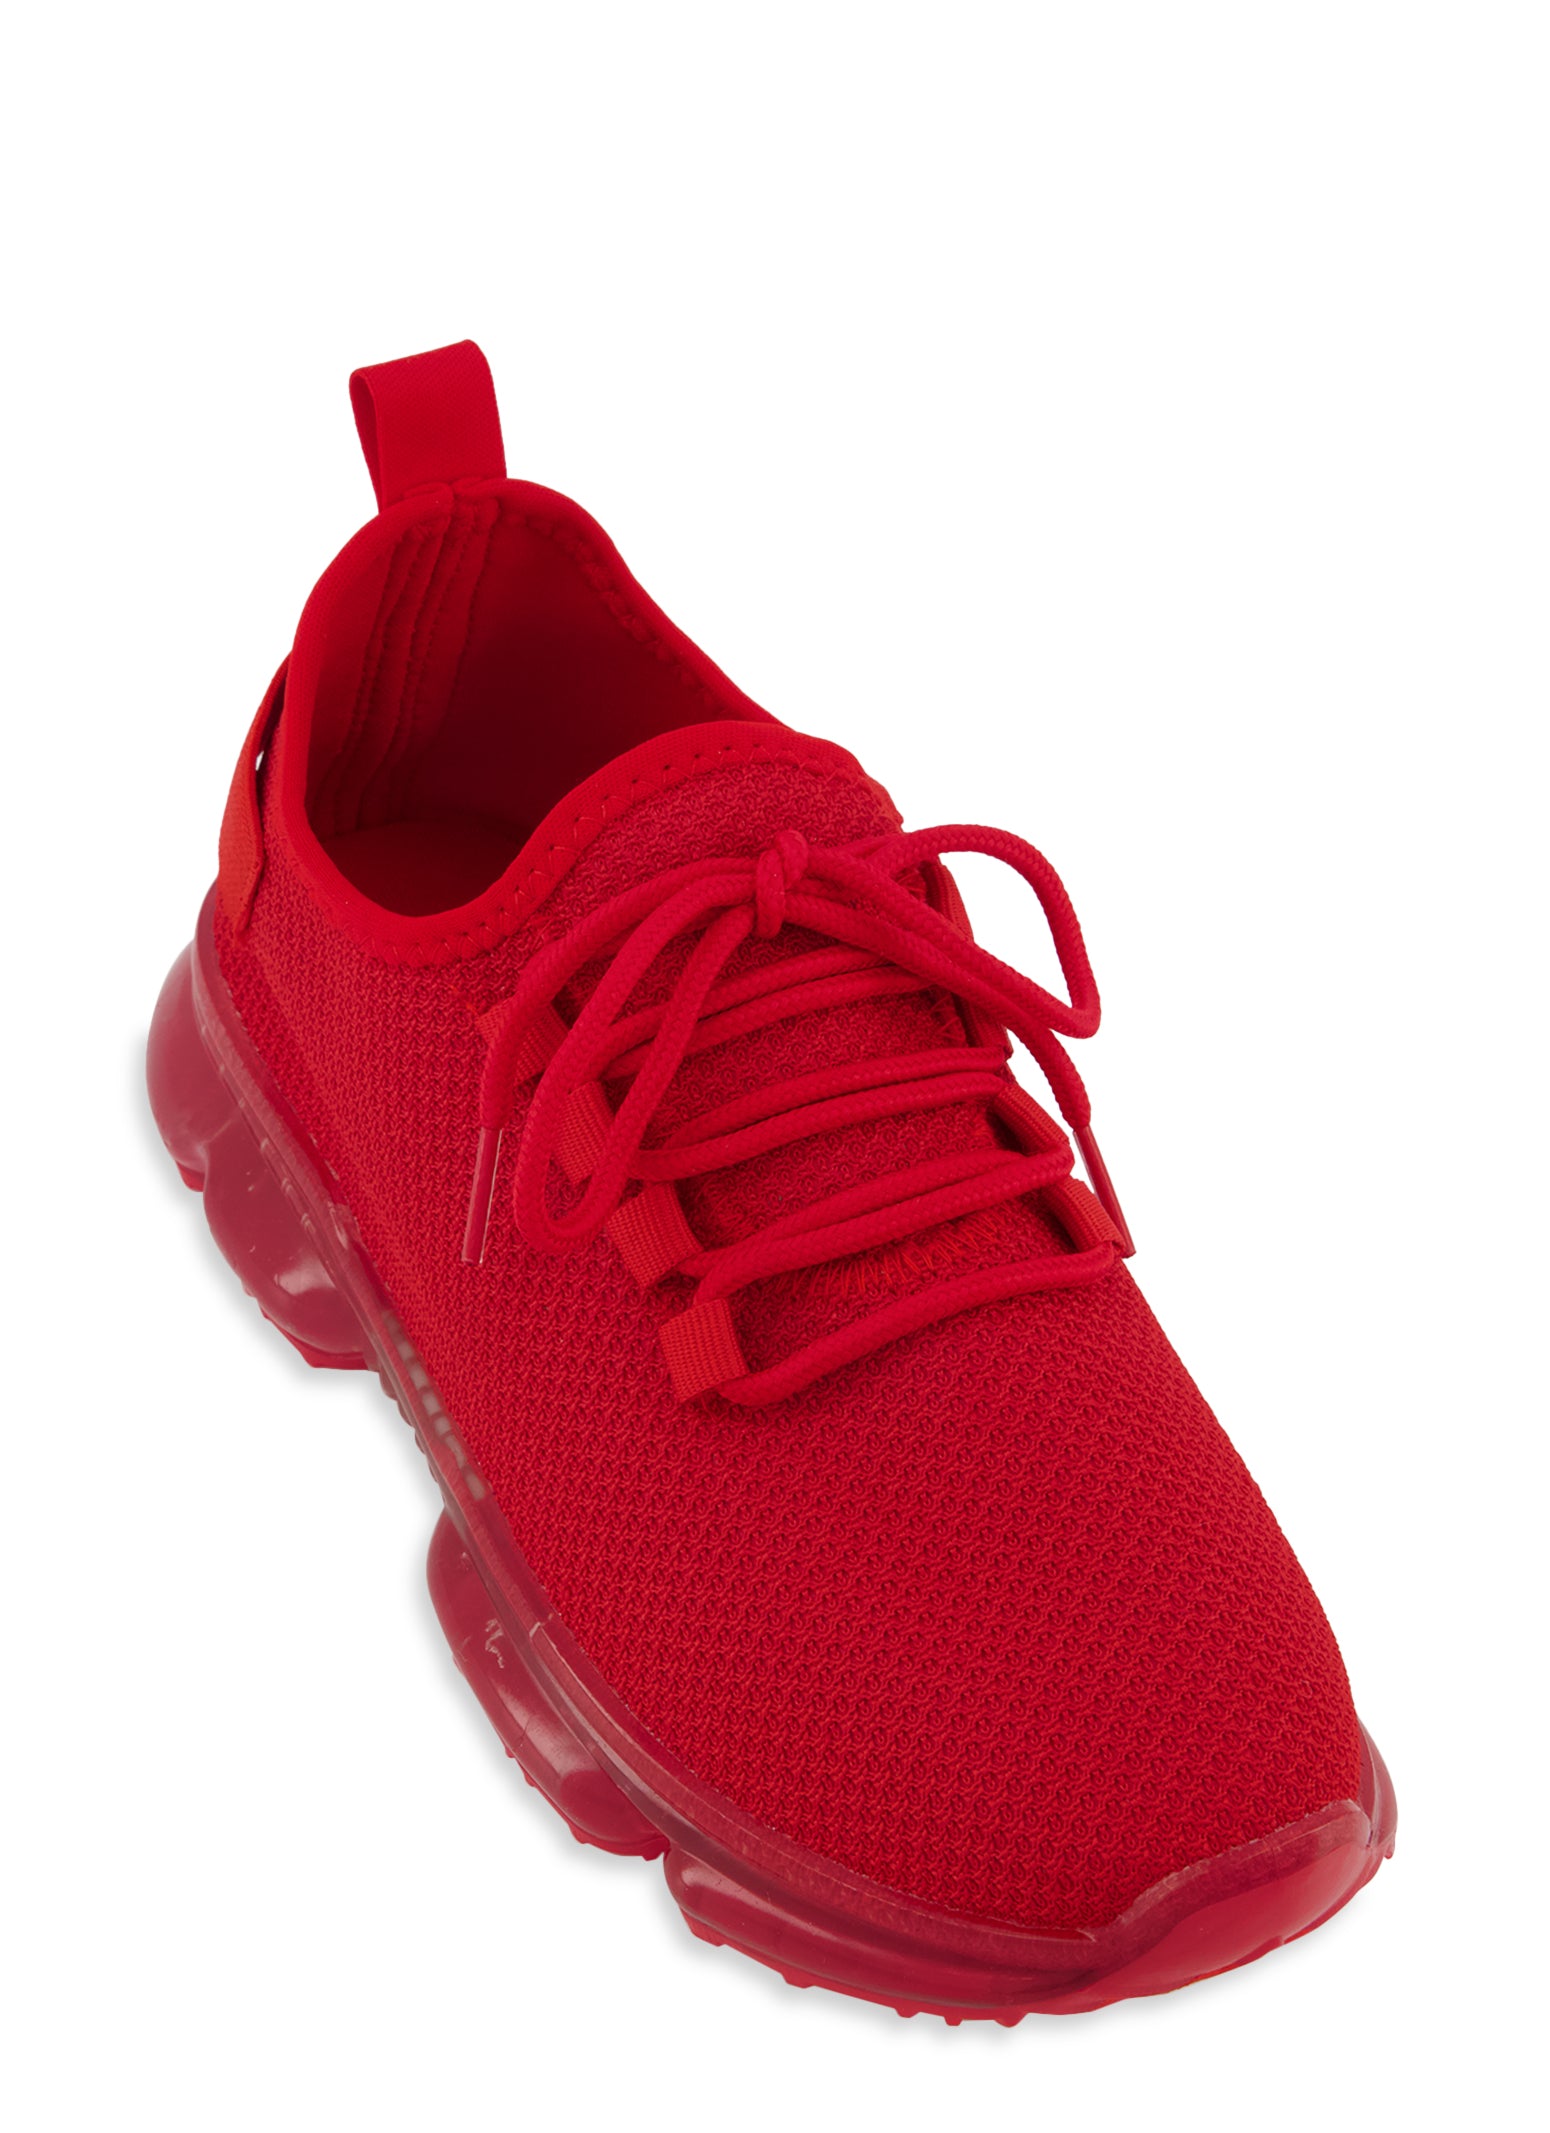 Womens Red Shoes | Everyday Low Prices | Rainbow